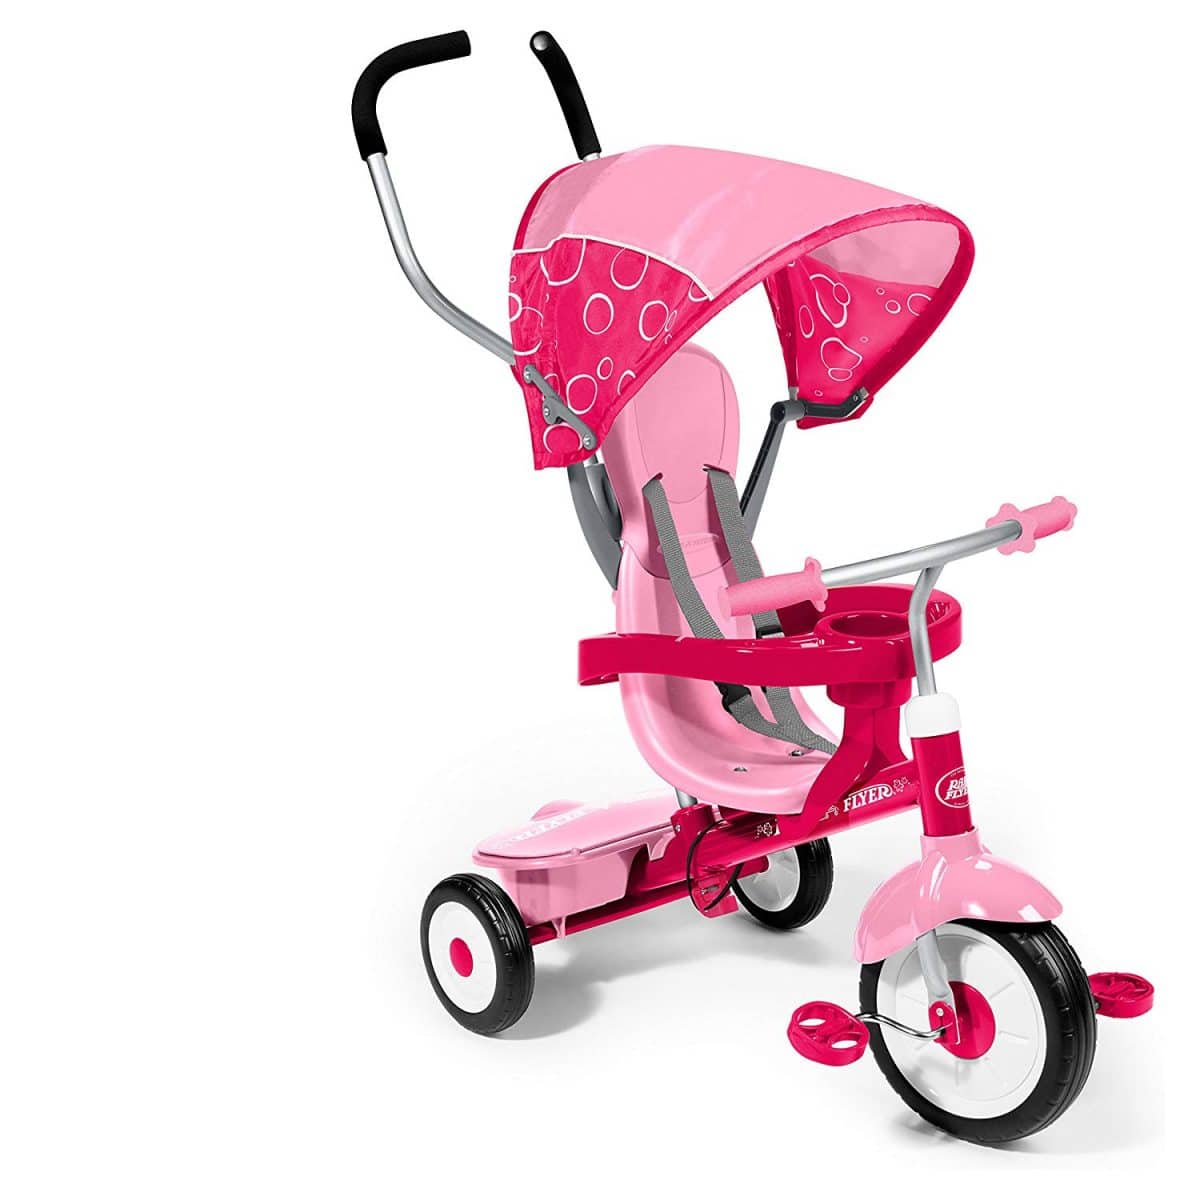 suitable gift for 1 year old baby girl